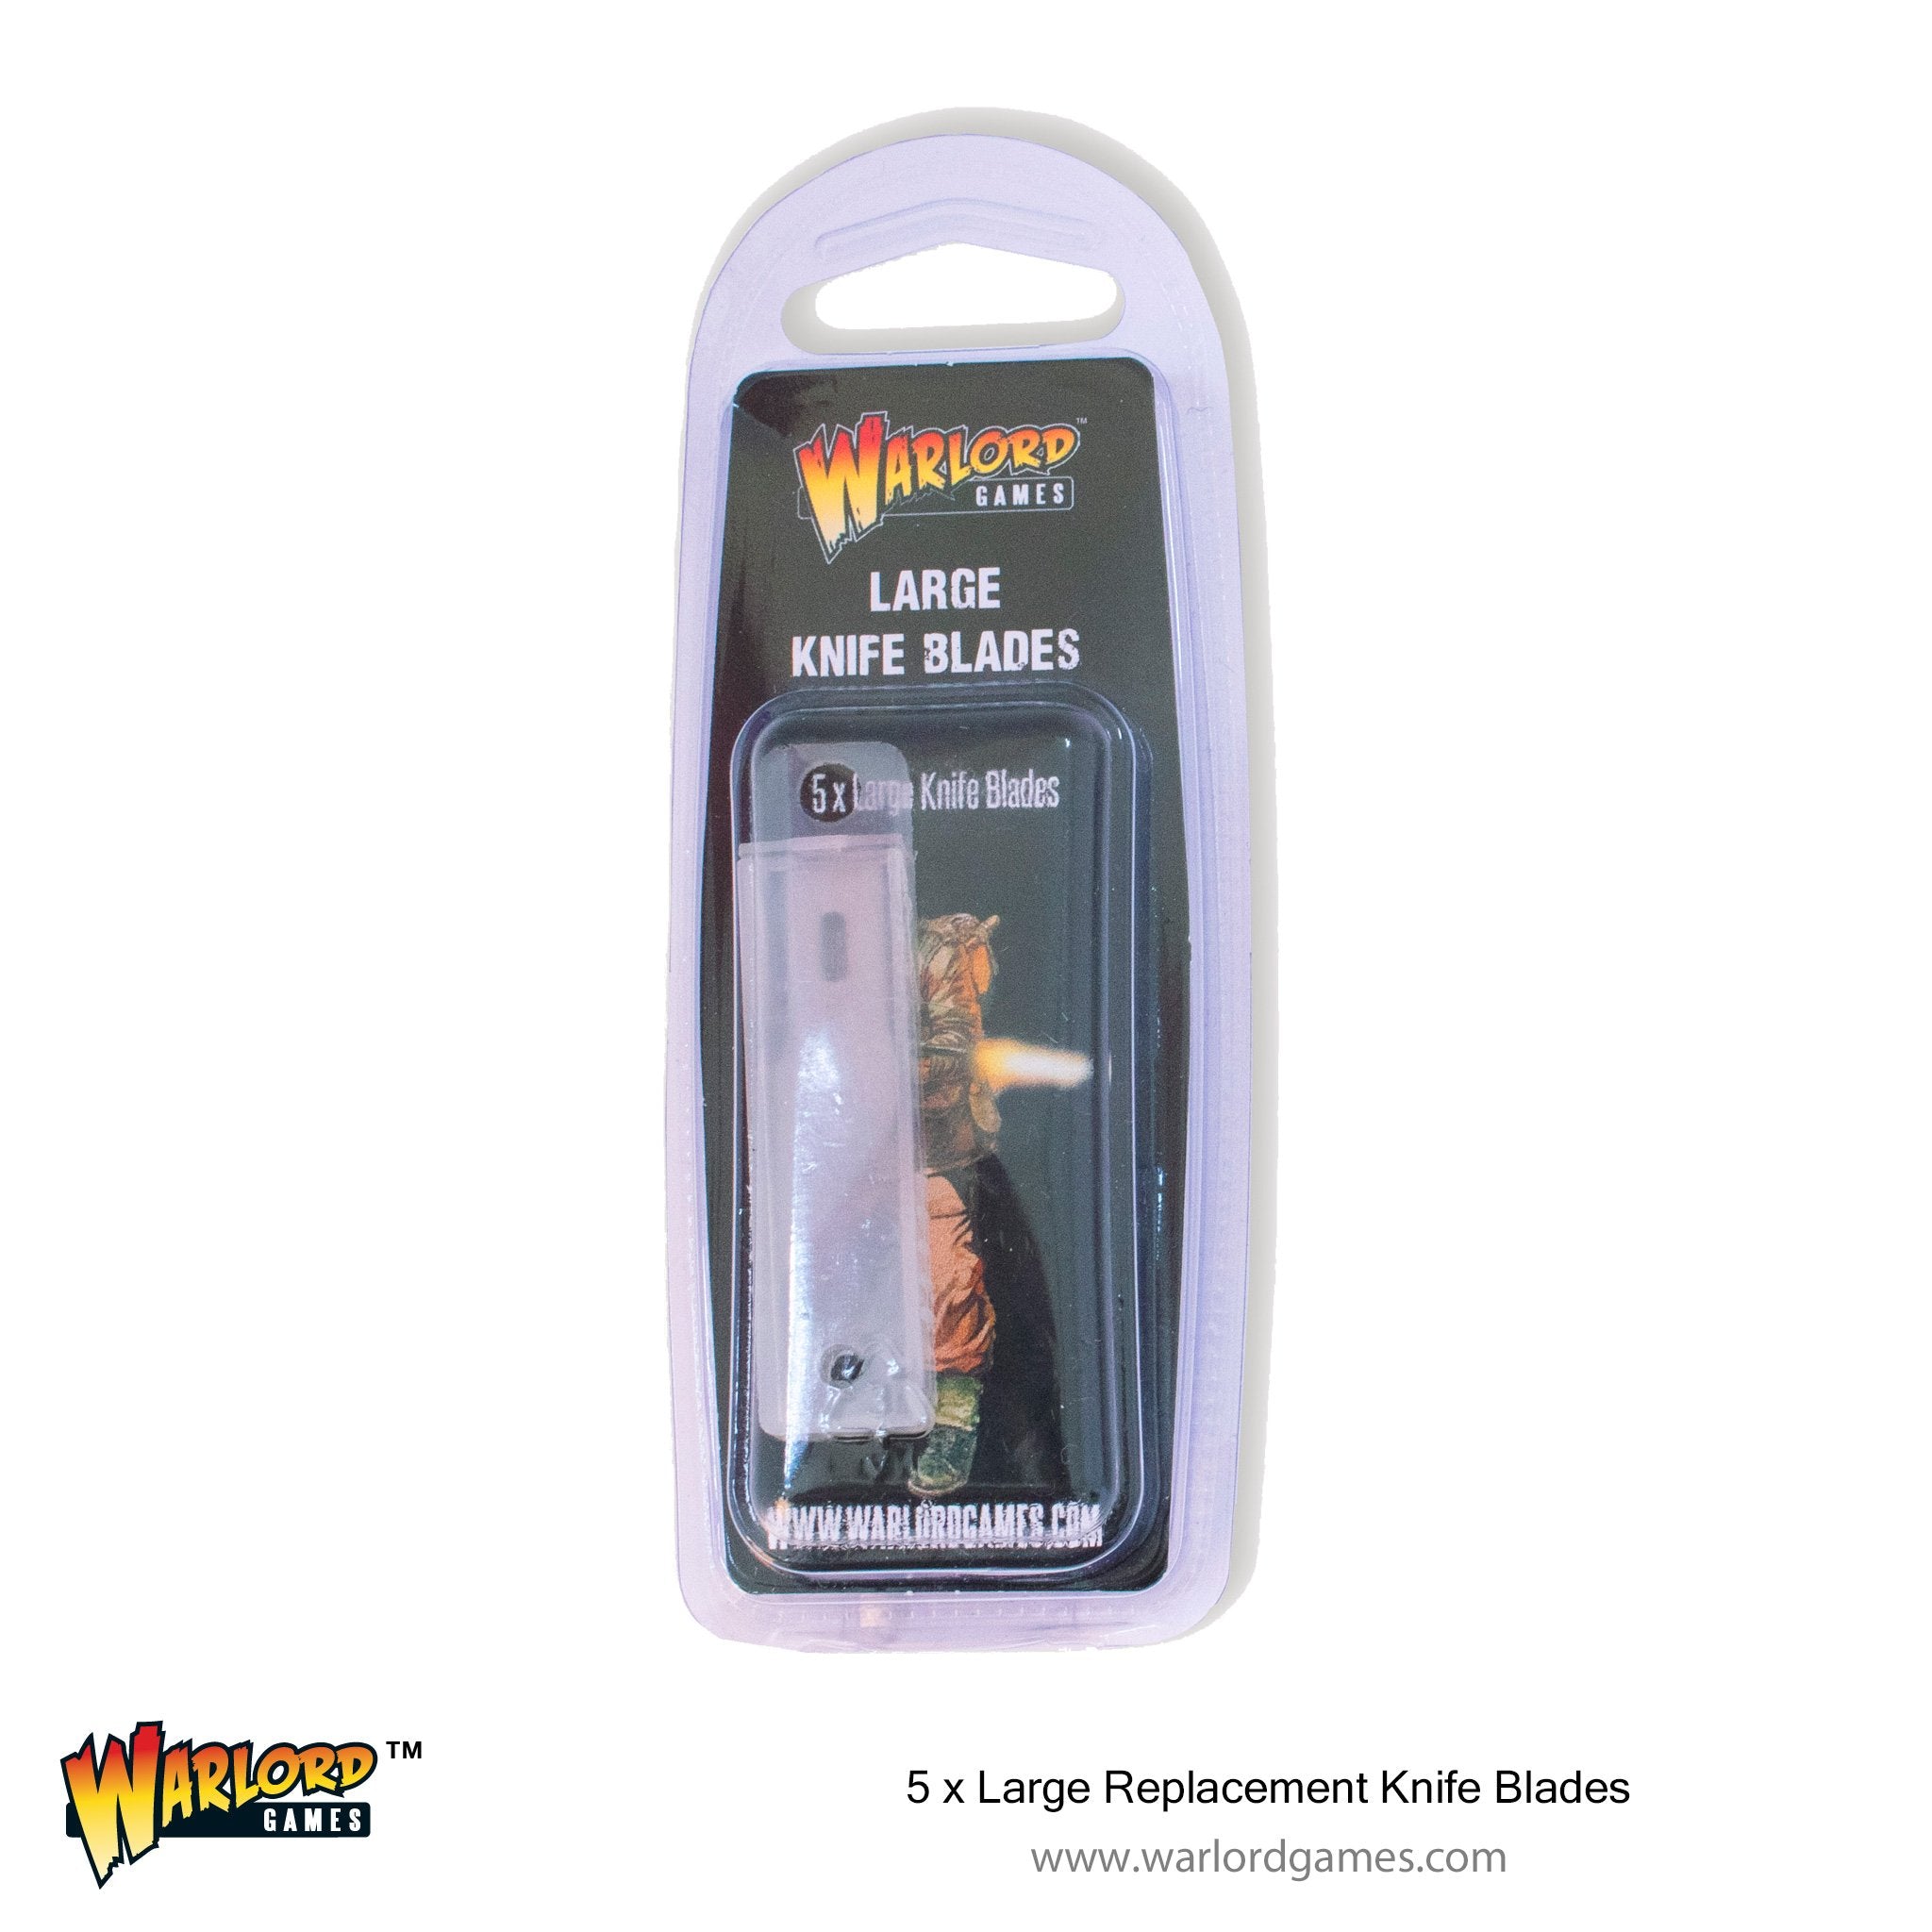 Large Replacement Knife Blades x 5